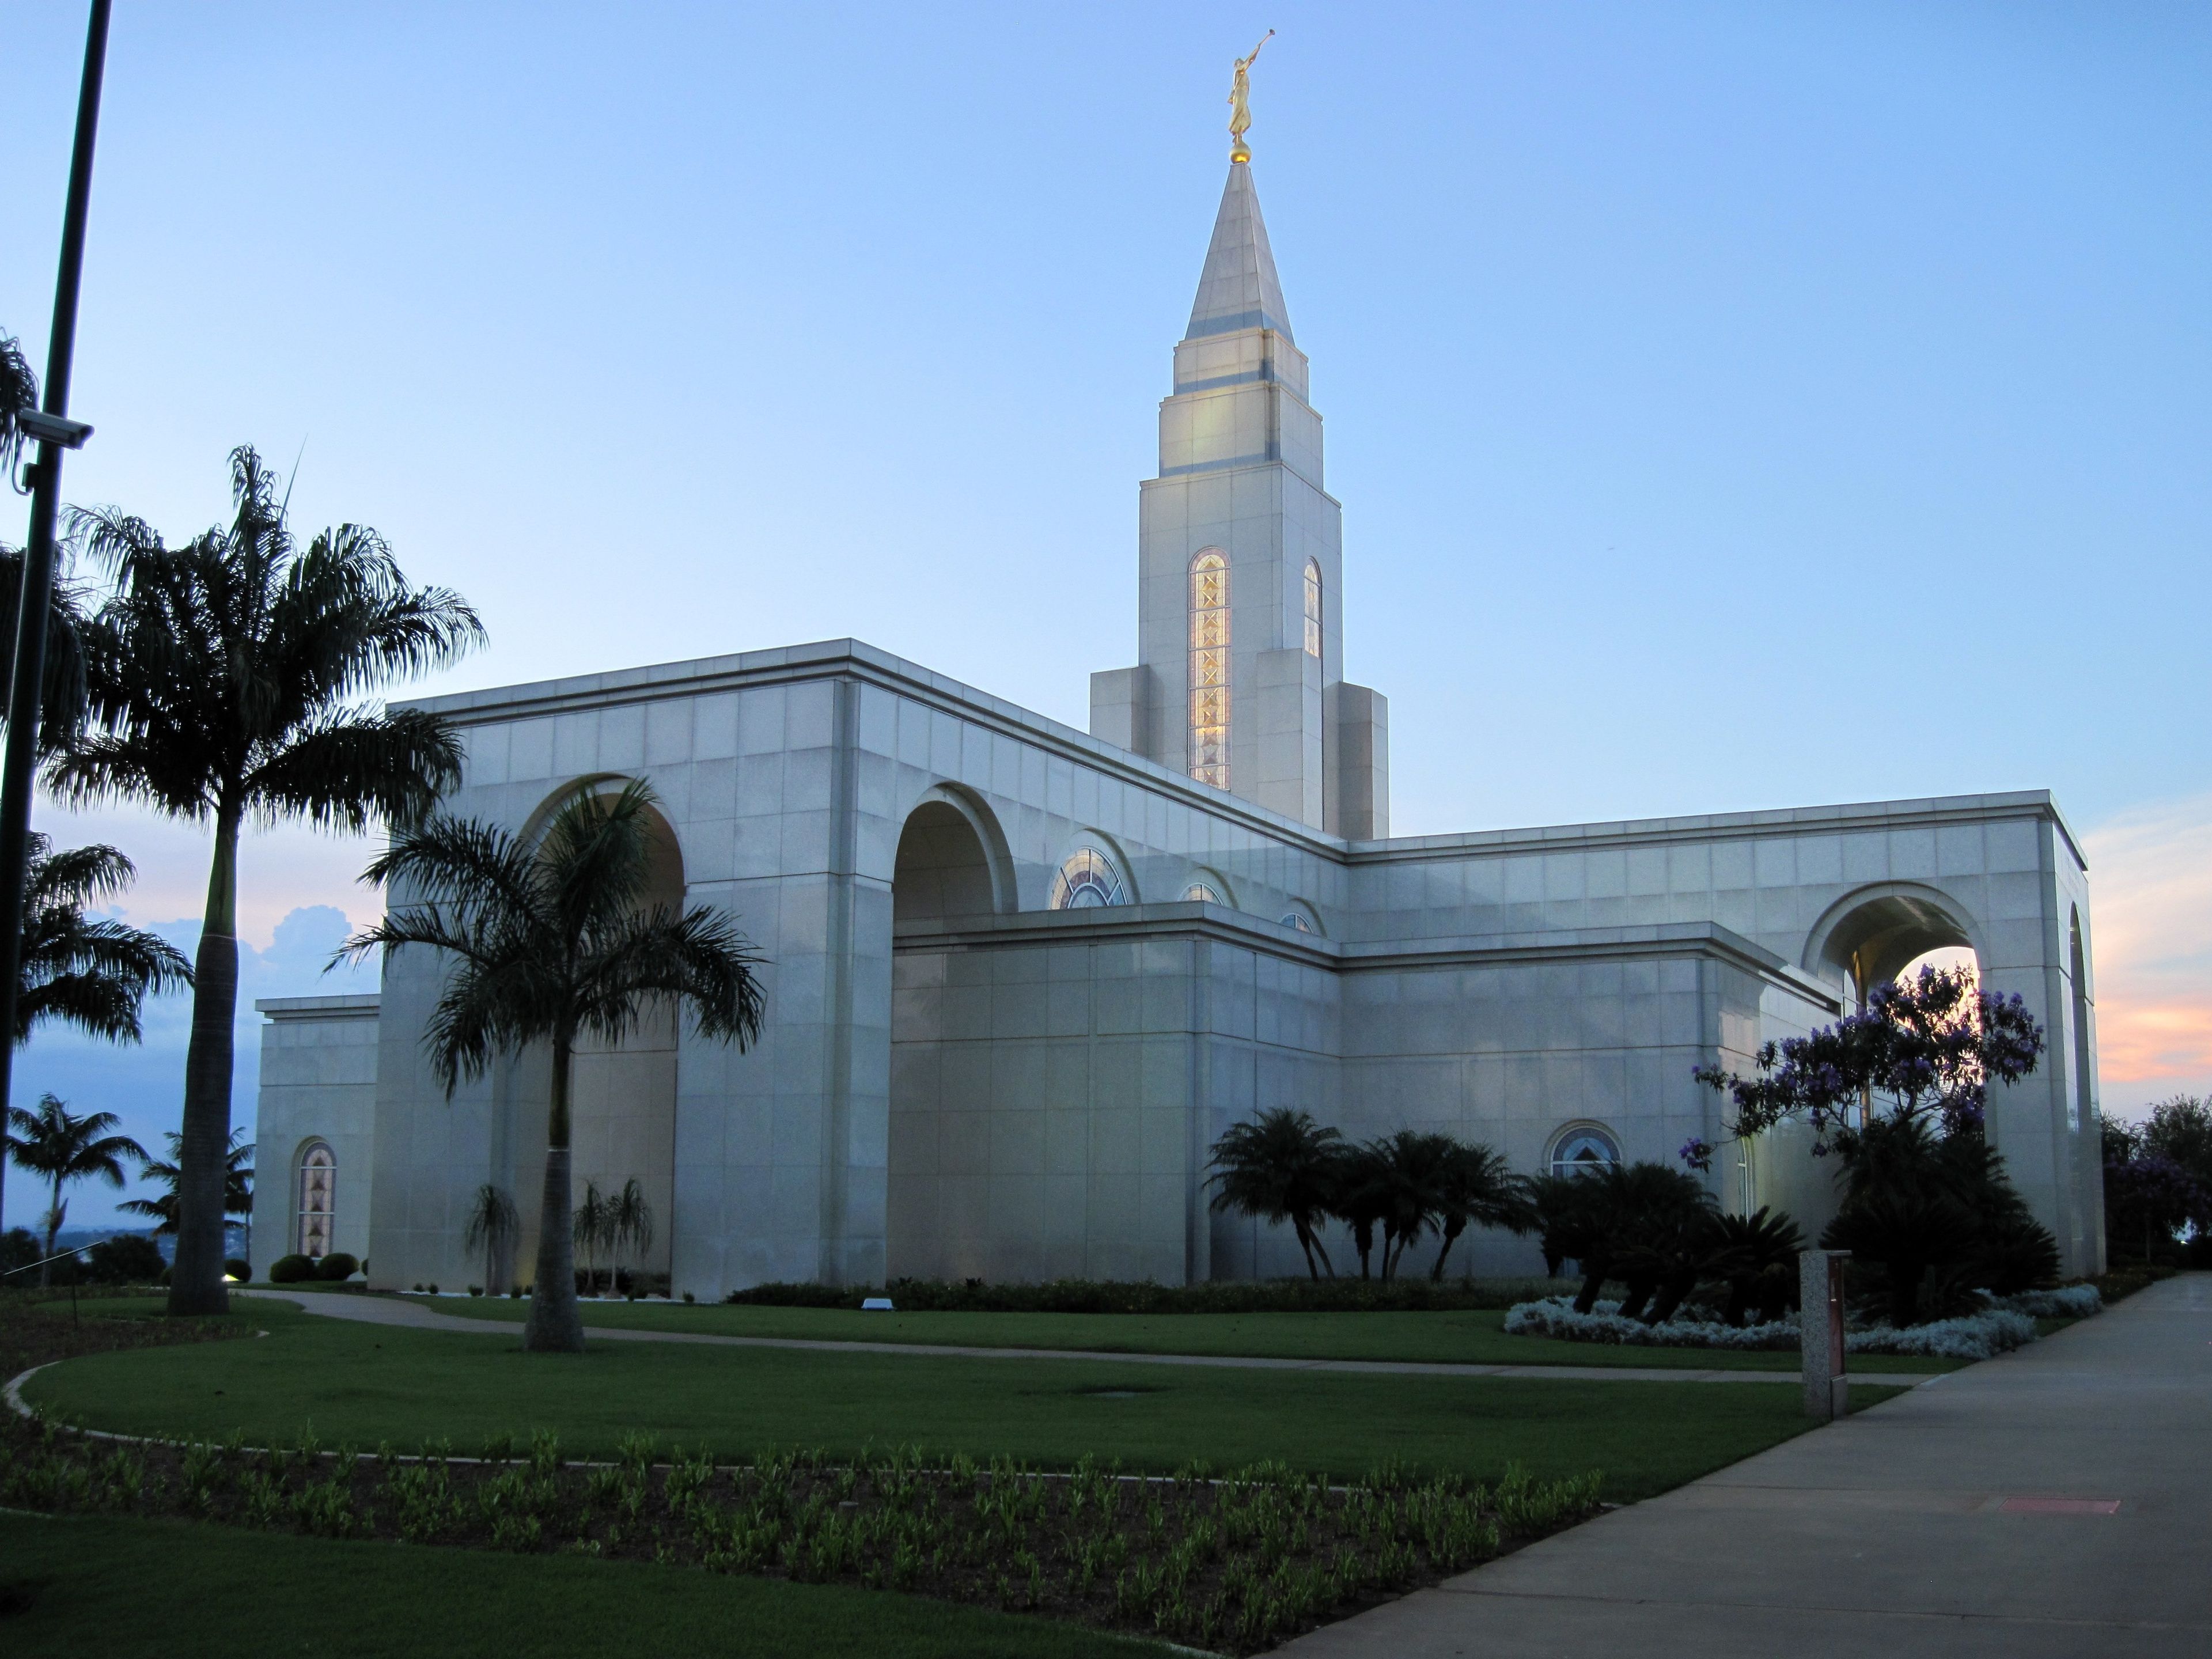 An exterior view of the Campinas Brazil Temple in the evening.